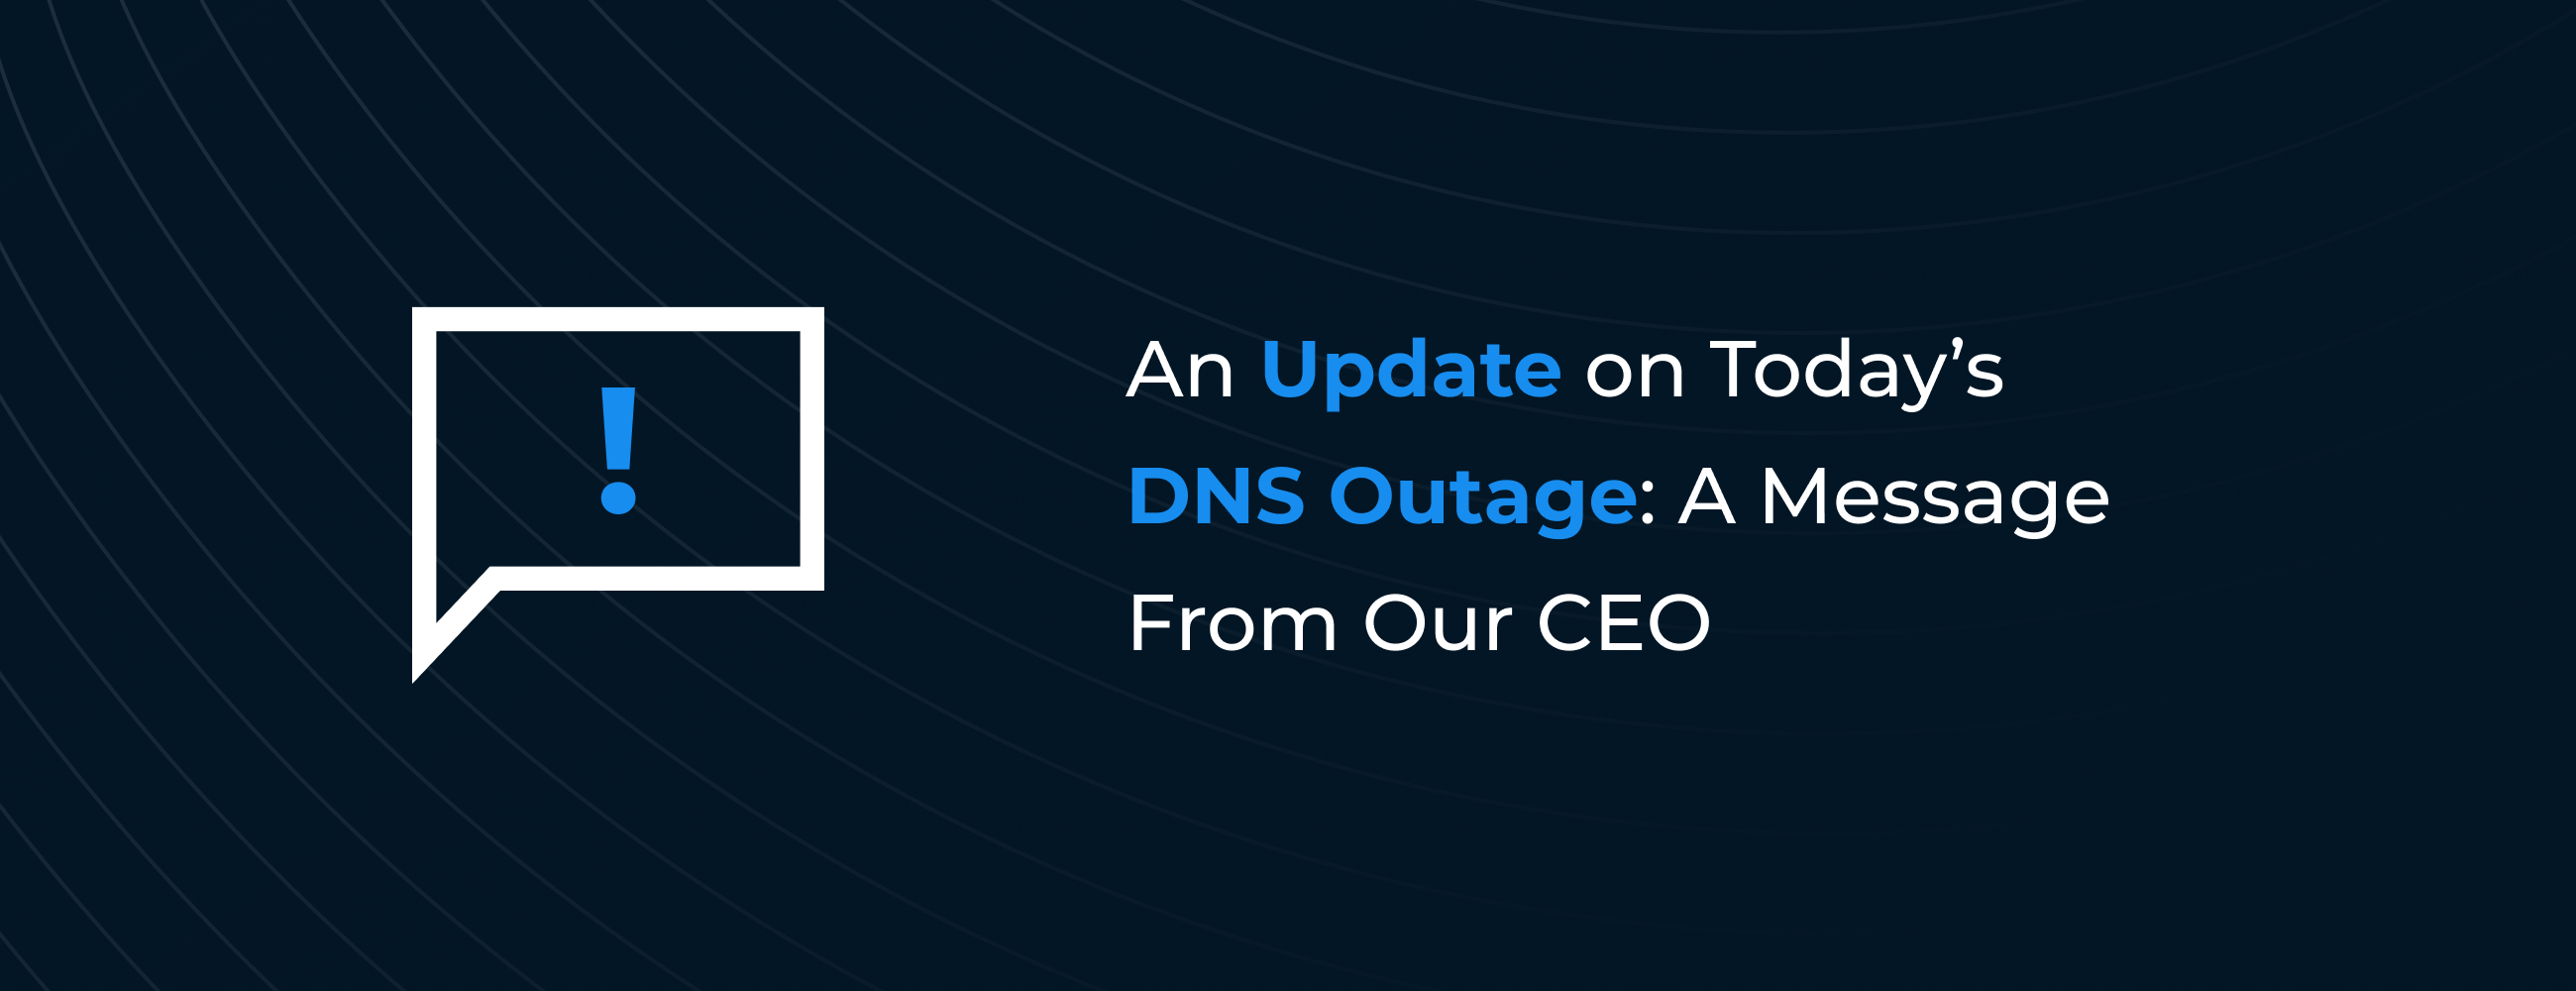 An Update on Today’s DNS Outage: A Message From Our CEO